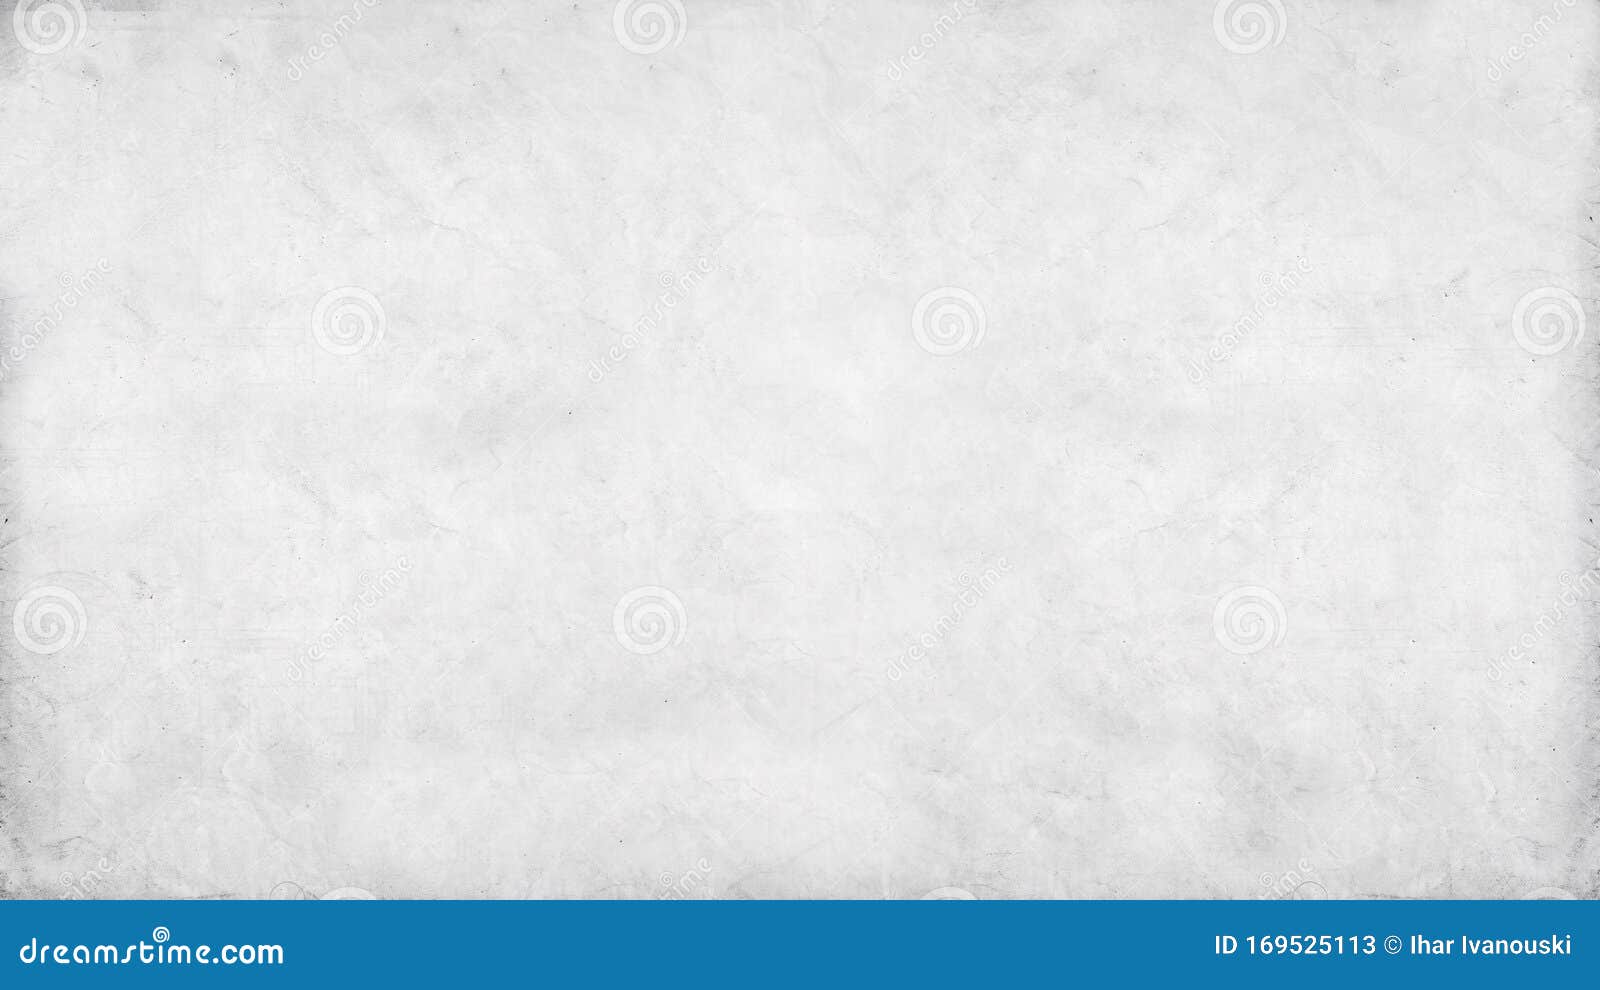 https://thumbs.dreamstime.com/z/parchment-paper-aged-time-white-textured-surface-texture-background-169525113.jpg